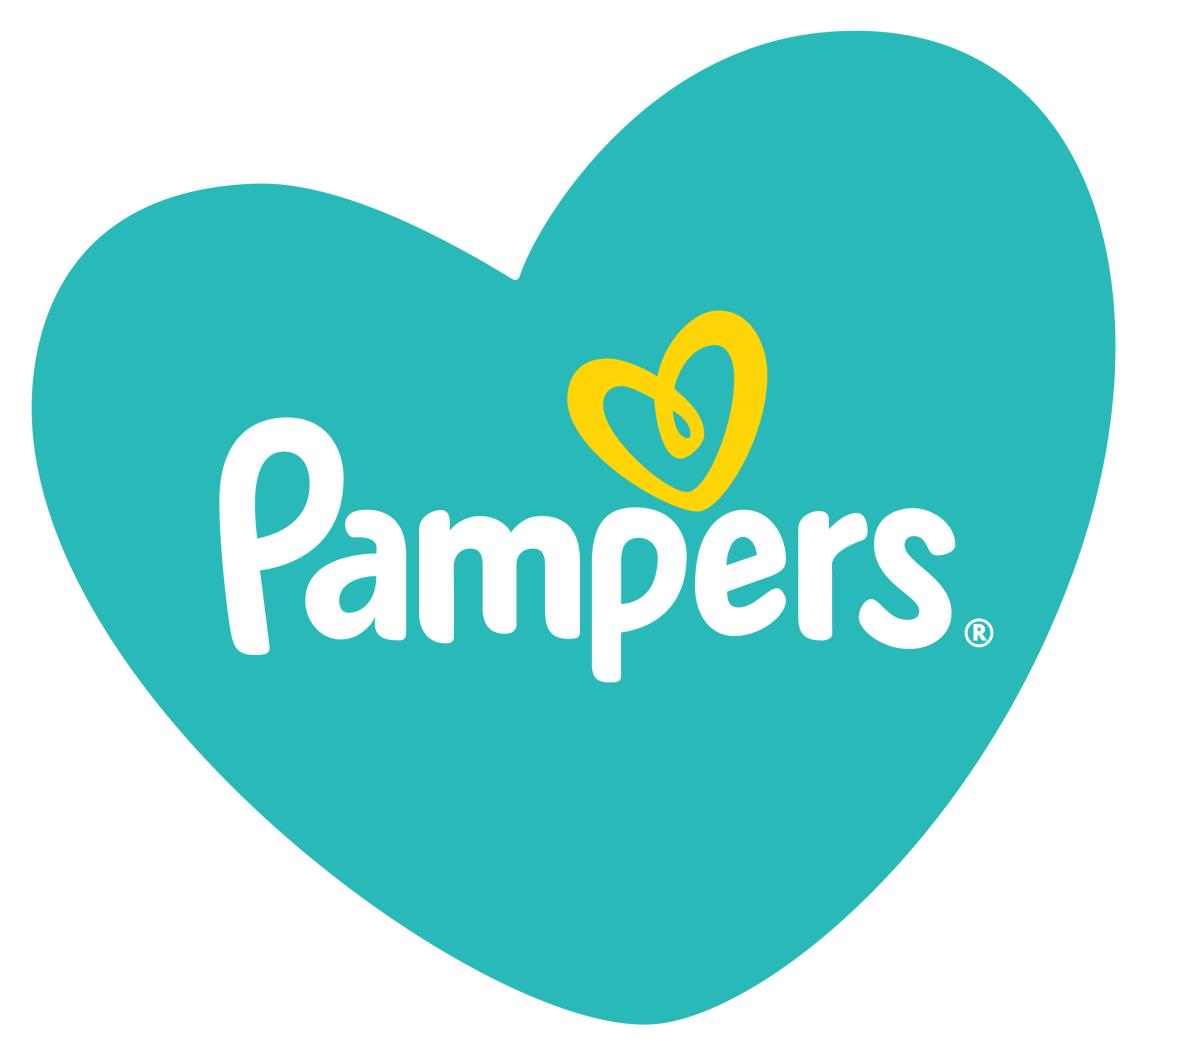 Pampers Logo Heart